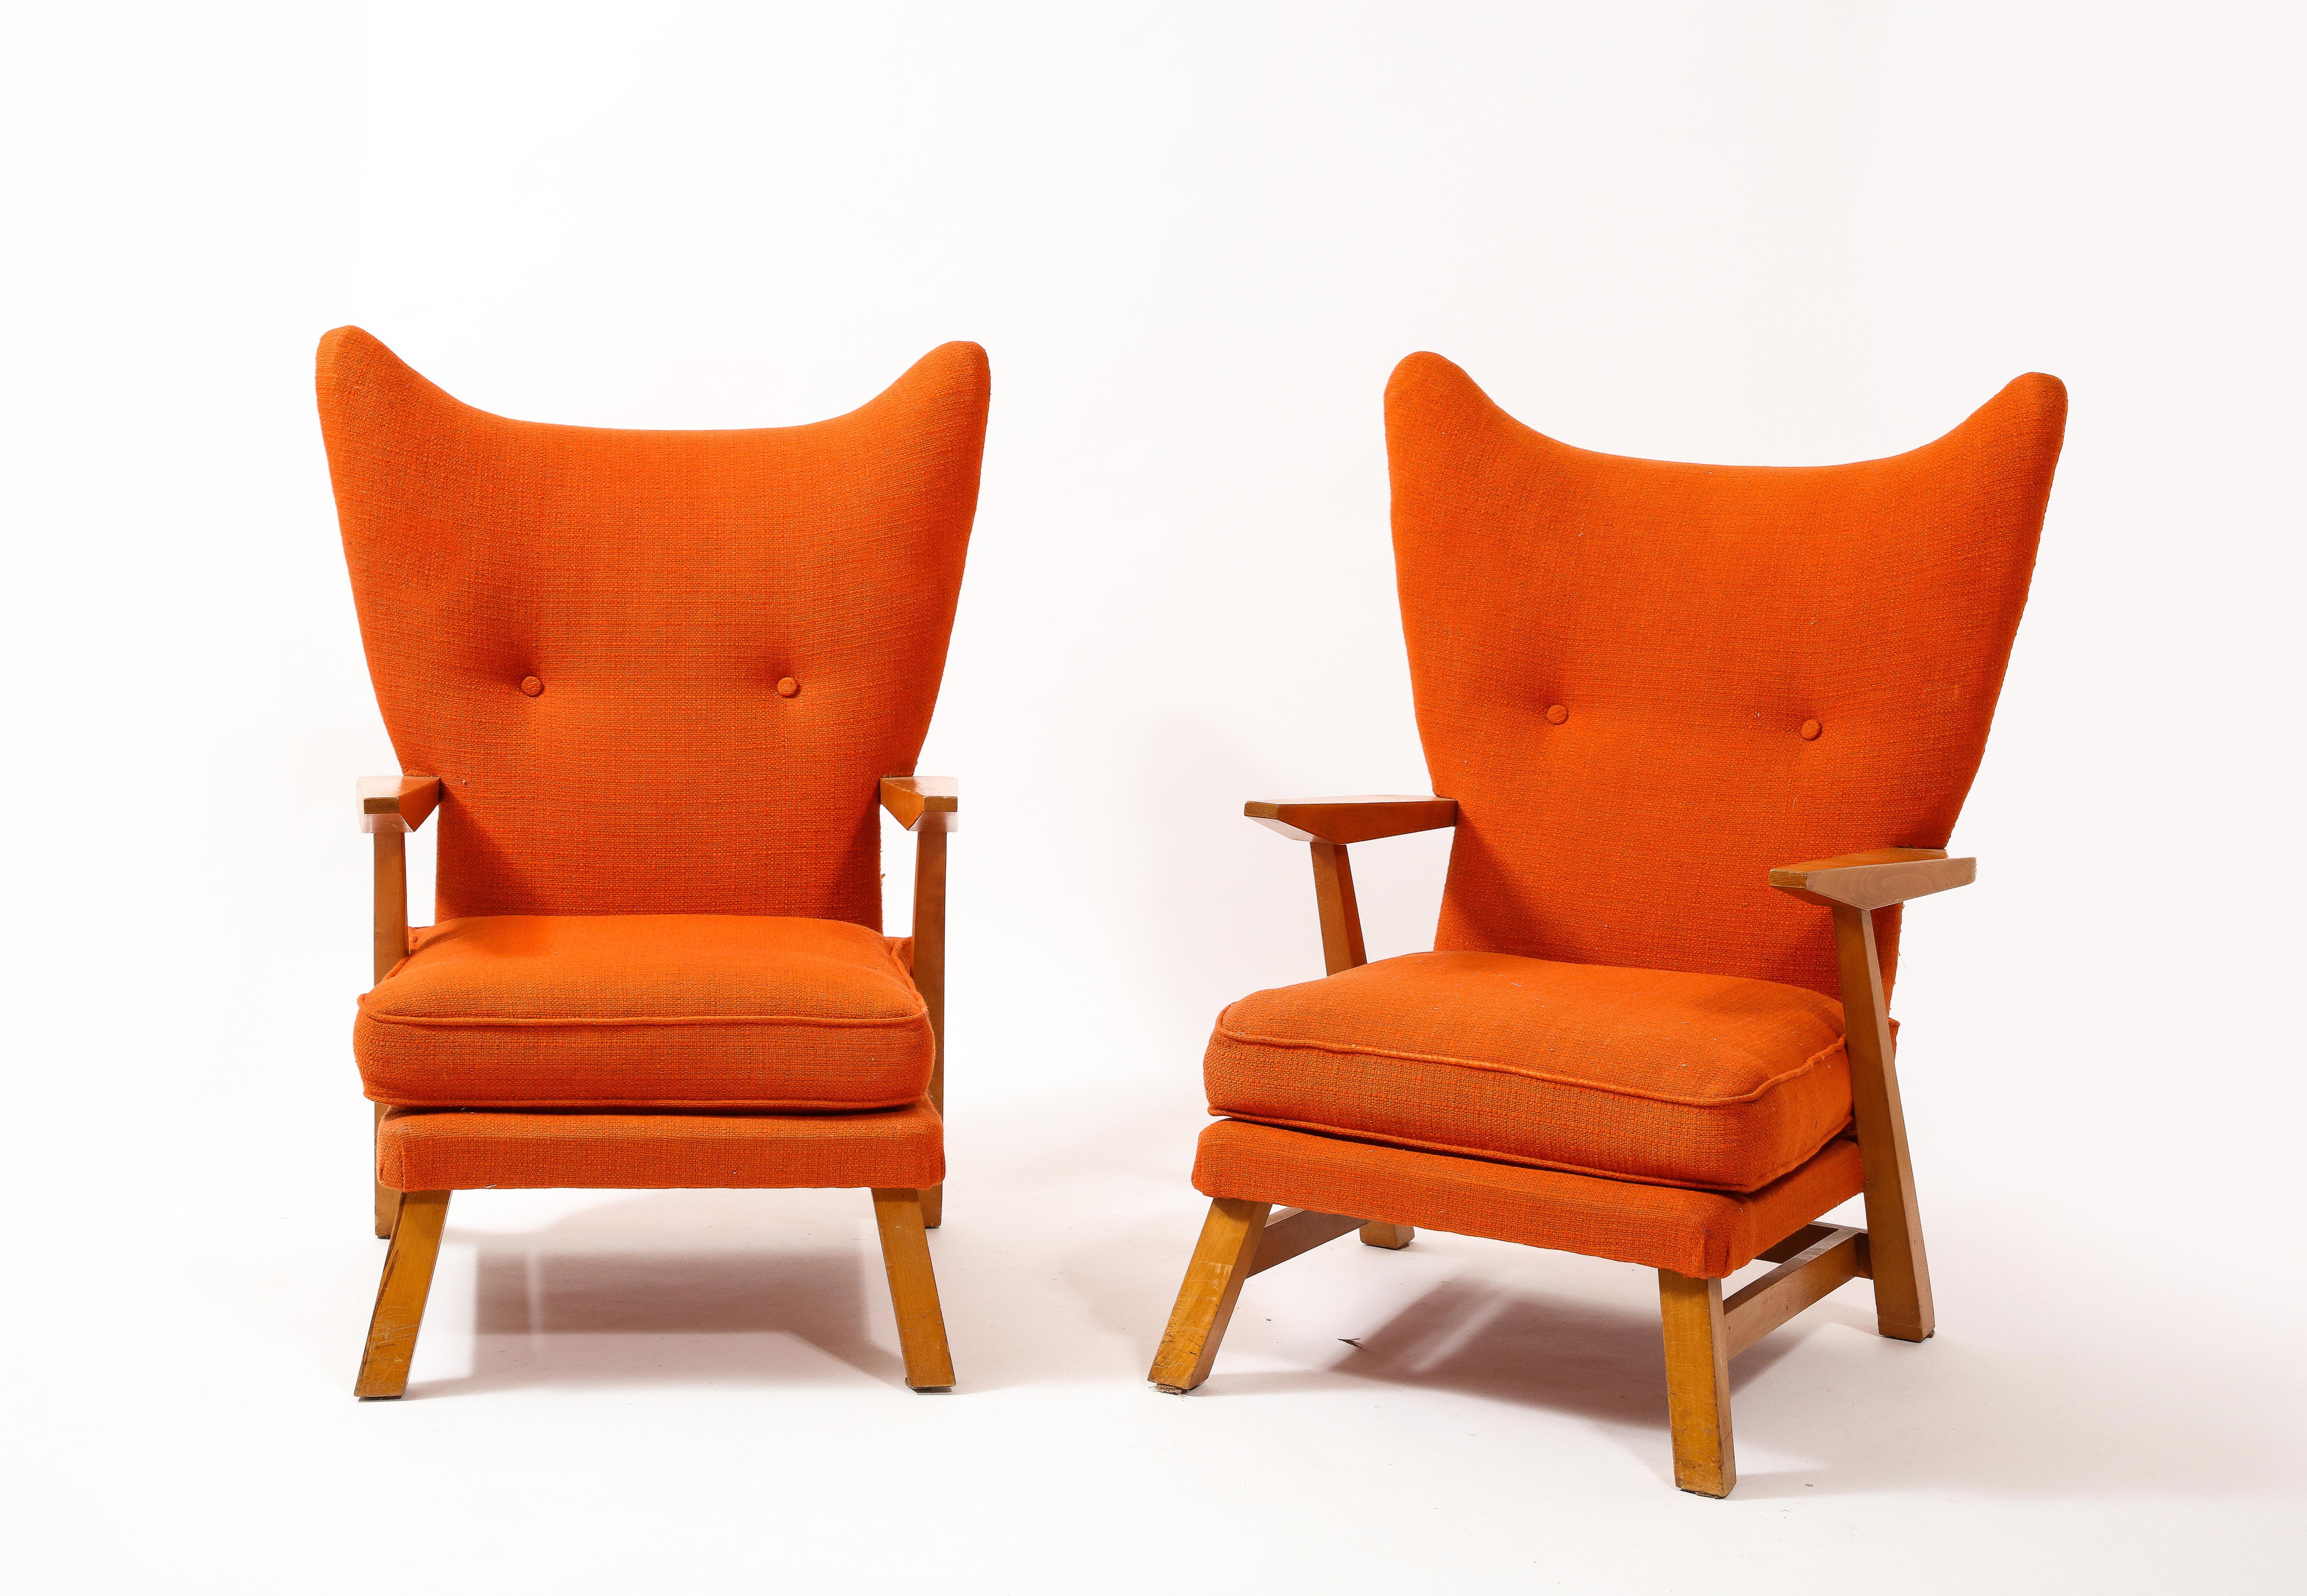 Large pair of wing chairs by Maison Regain in elm and original wool upholstery. The pitch is upright. Sit test encouraged. COM available on request.